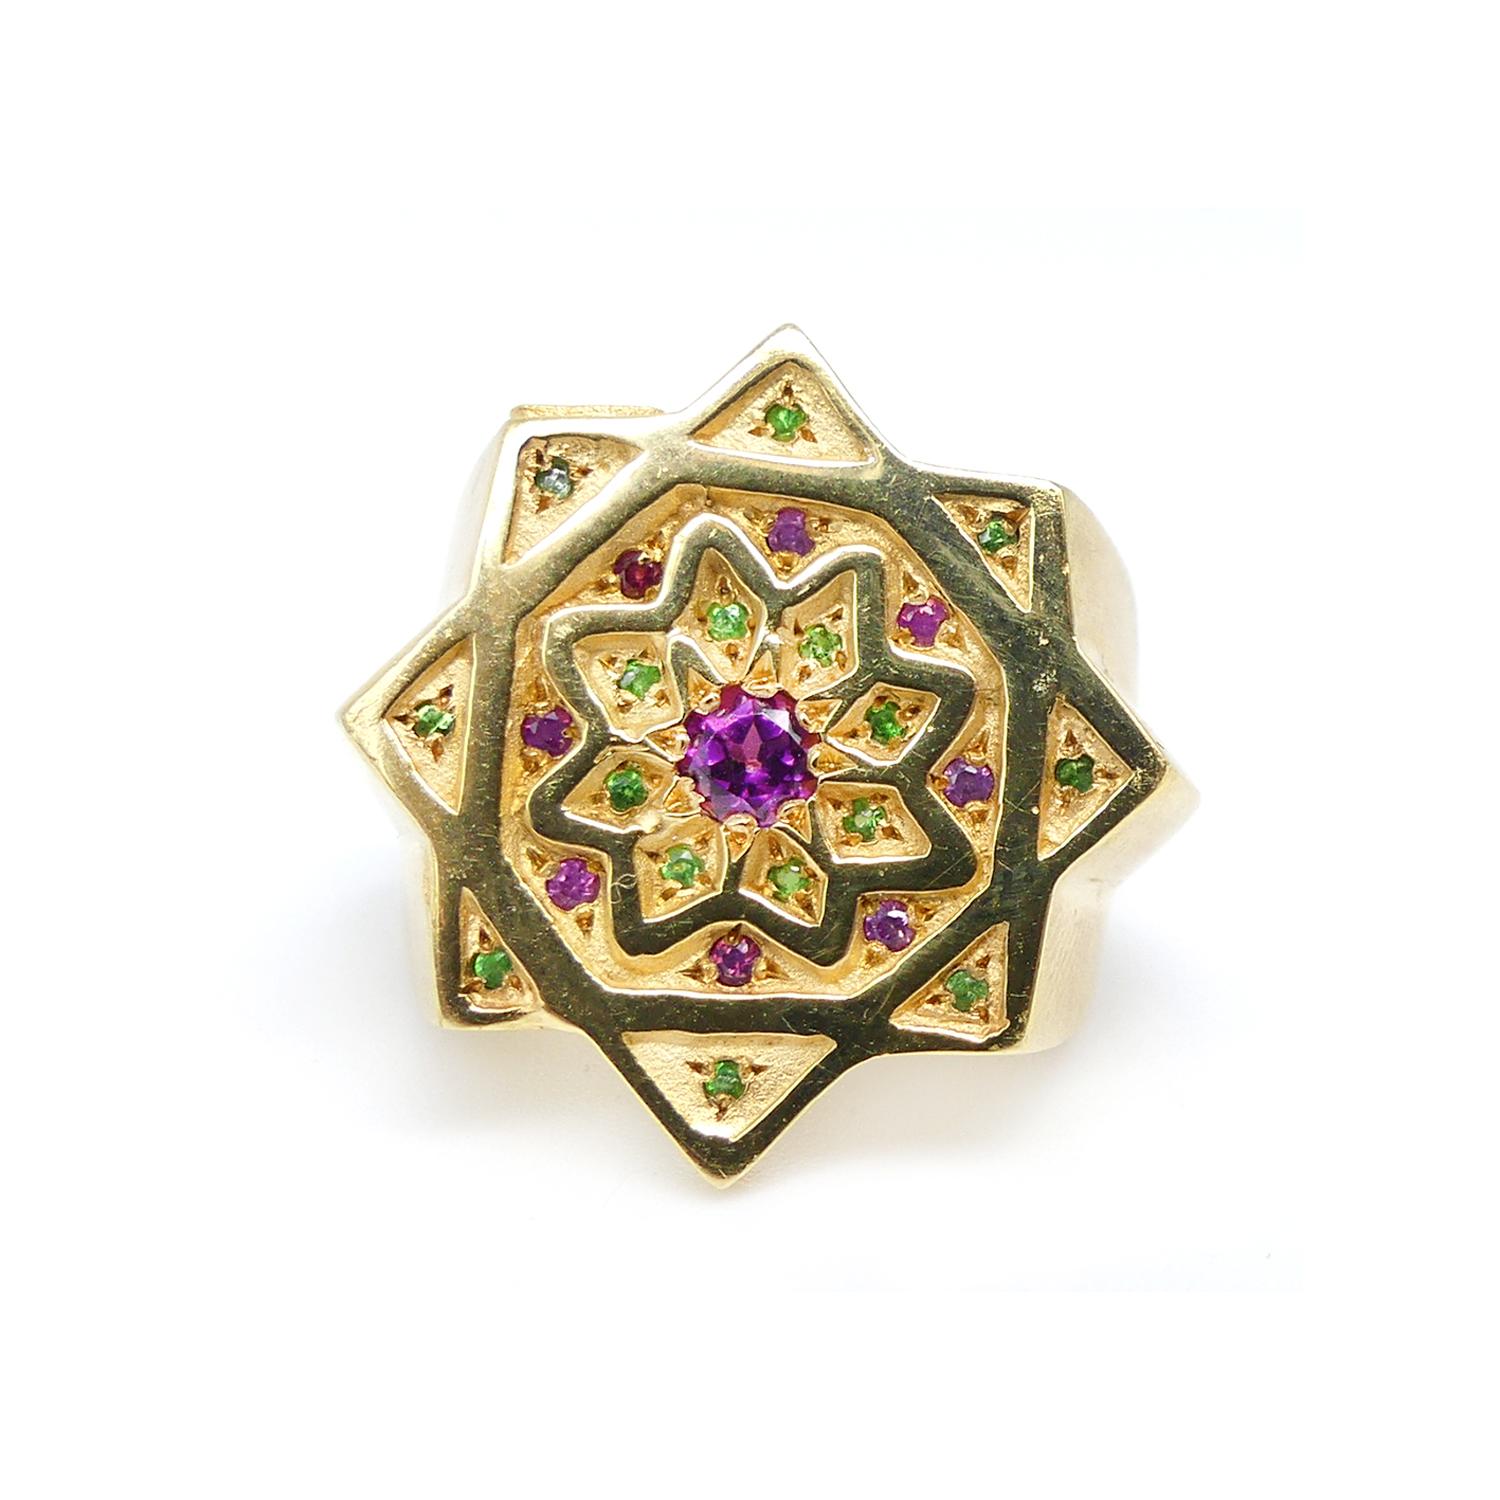 Contemporary Vicente Gracia Amethyst Rubies Tsavorites Silver Gold Plated Ring